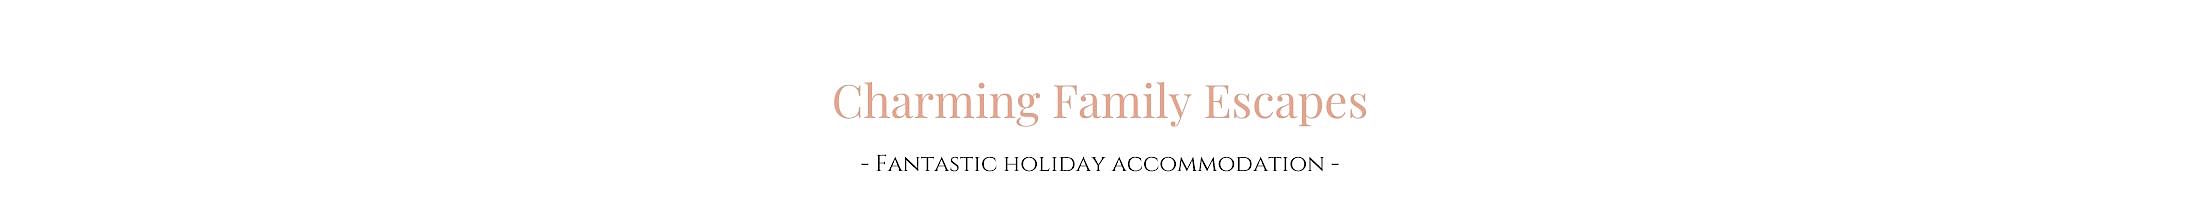 Charming Family Escapes